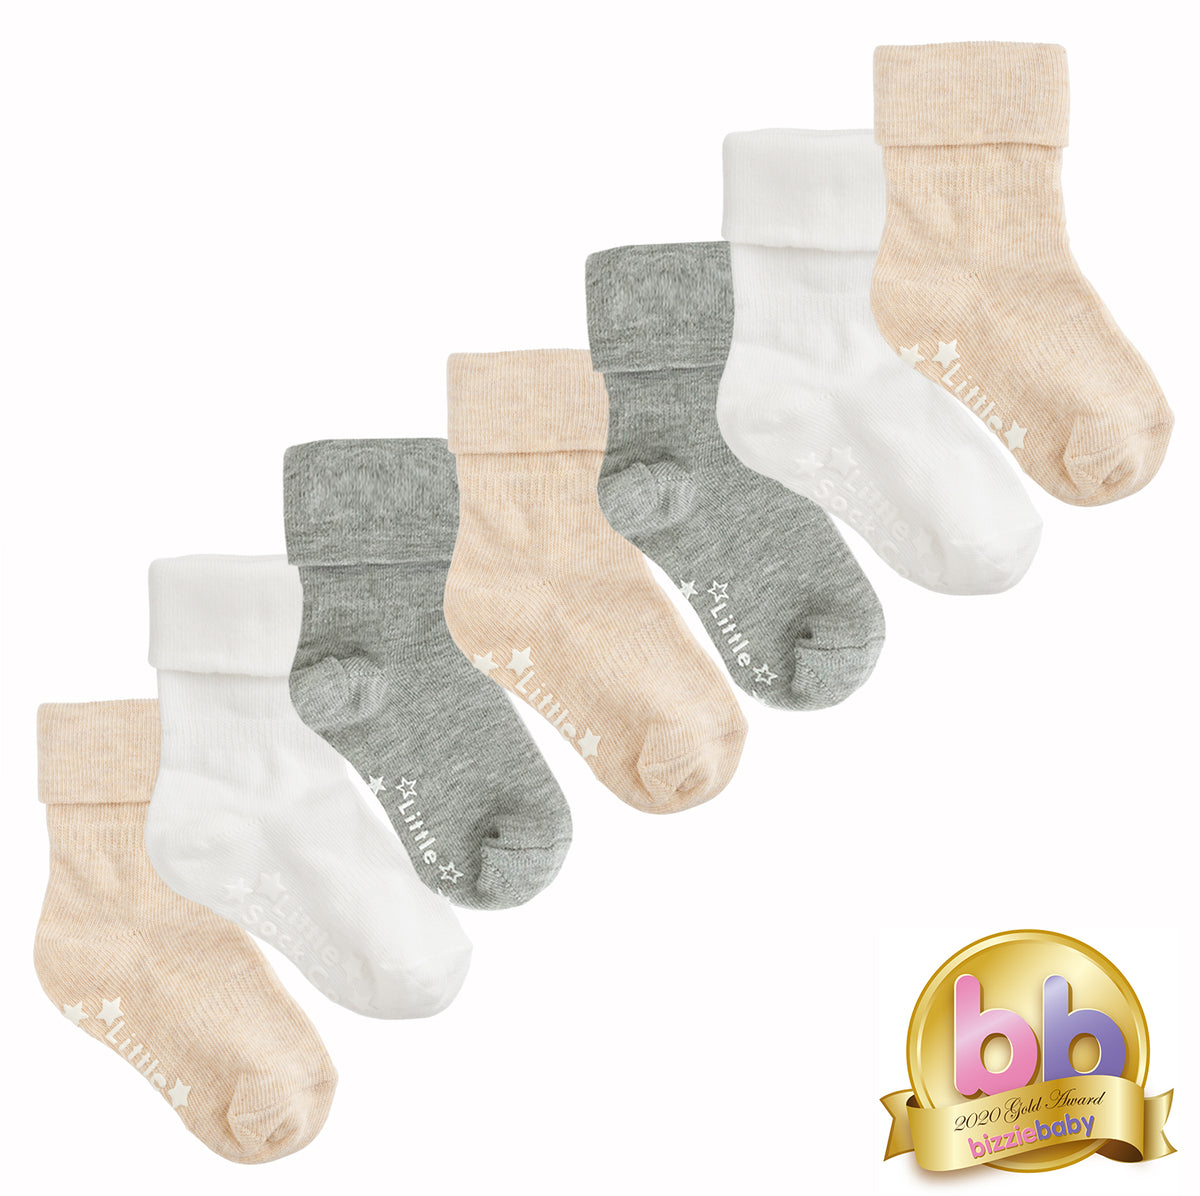 Non-Slip Stay On Baby and Toddler Socks - 7 Pack in Grey Marl, Oat and White